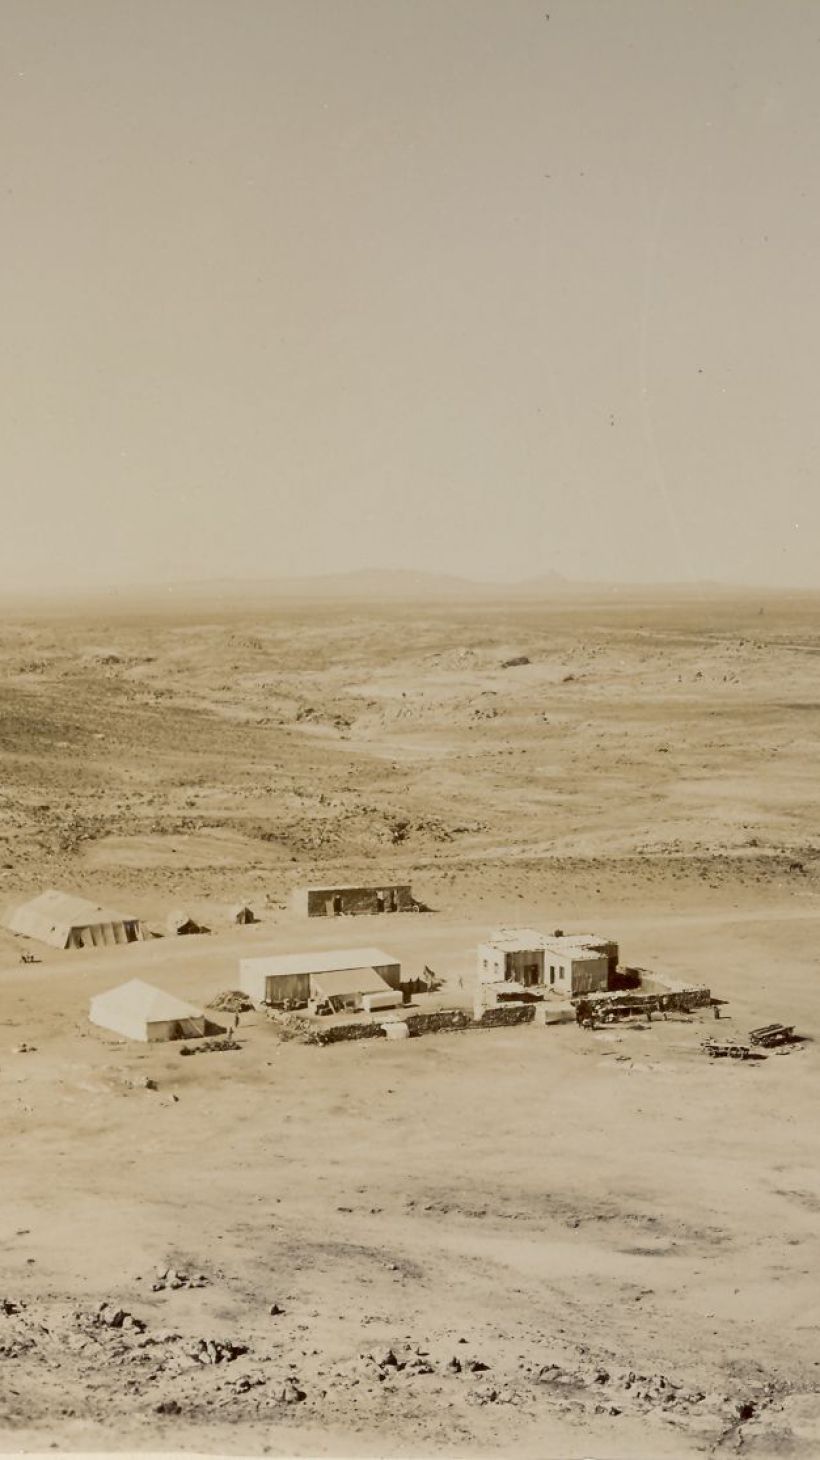 A photo of Station Kubub in the middle of the desert.